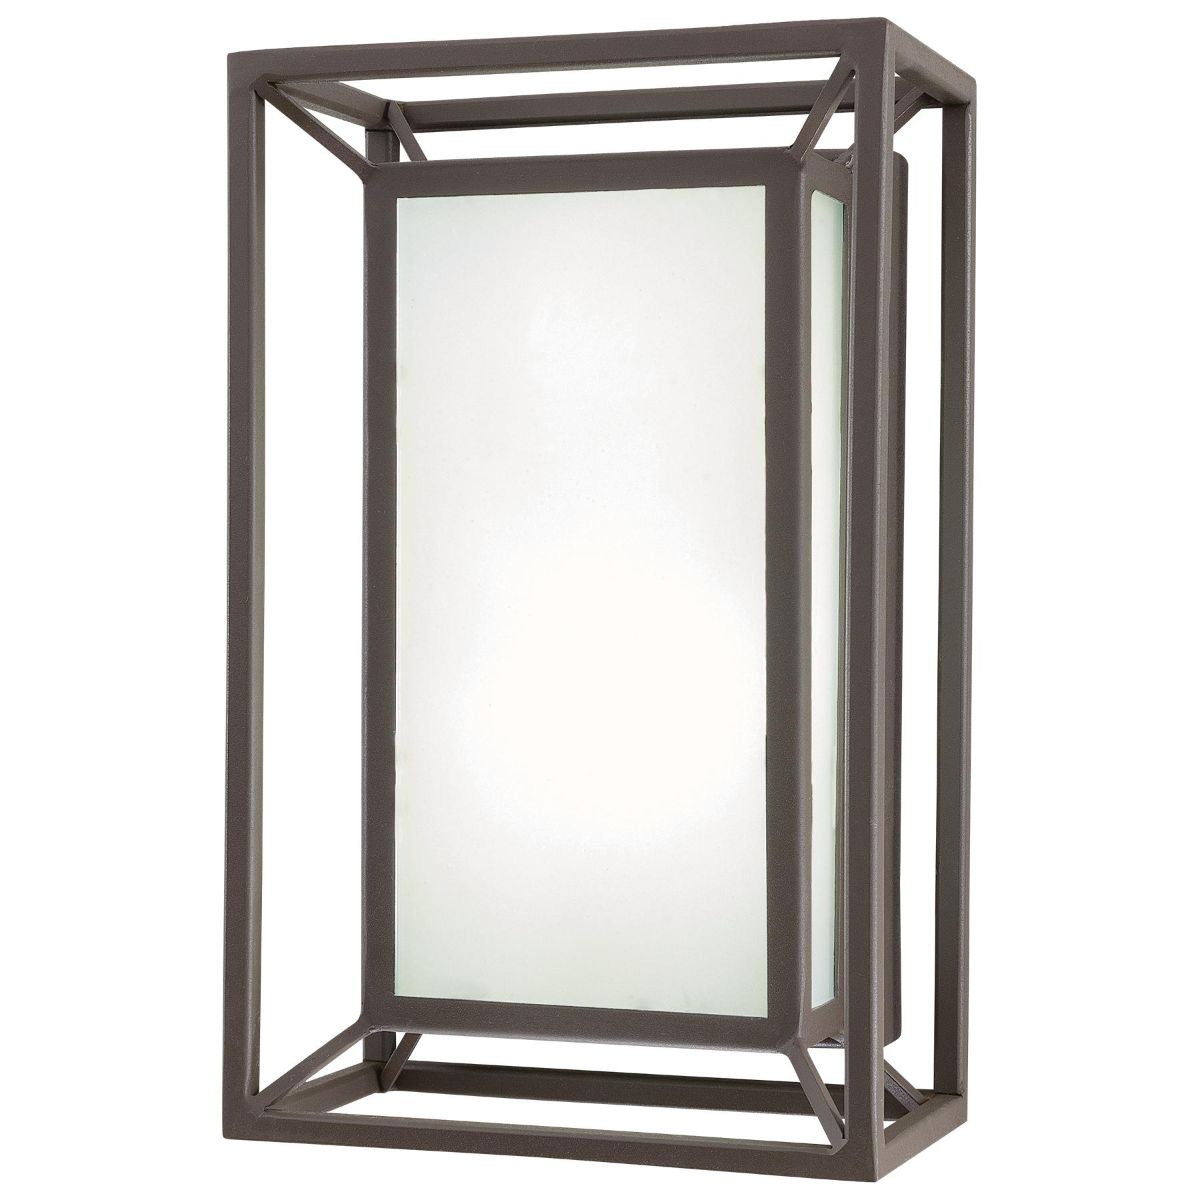 Outline 11 in. LED Outdoor Wall Sconce Bronze Finish